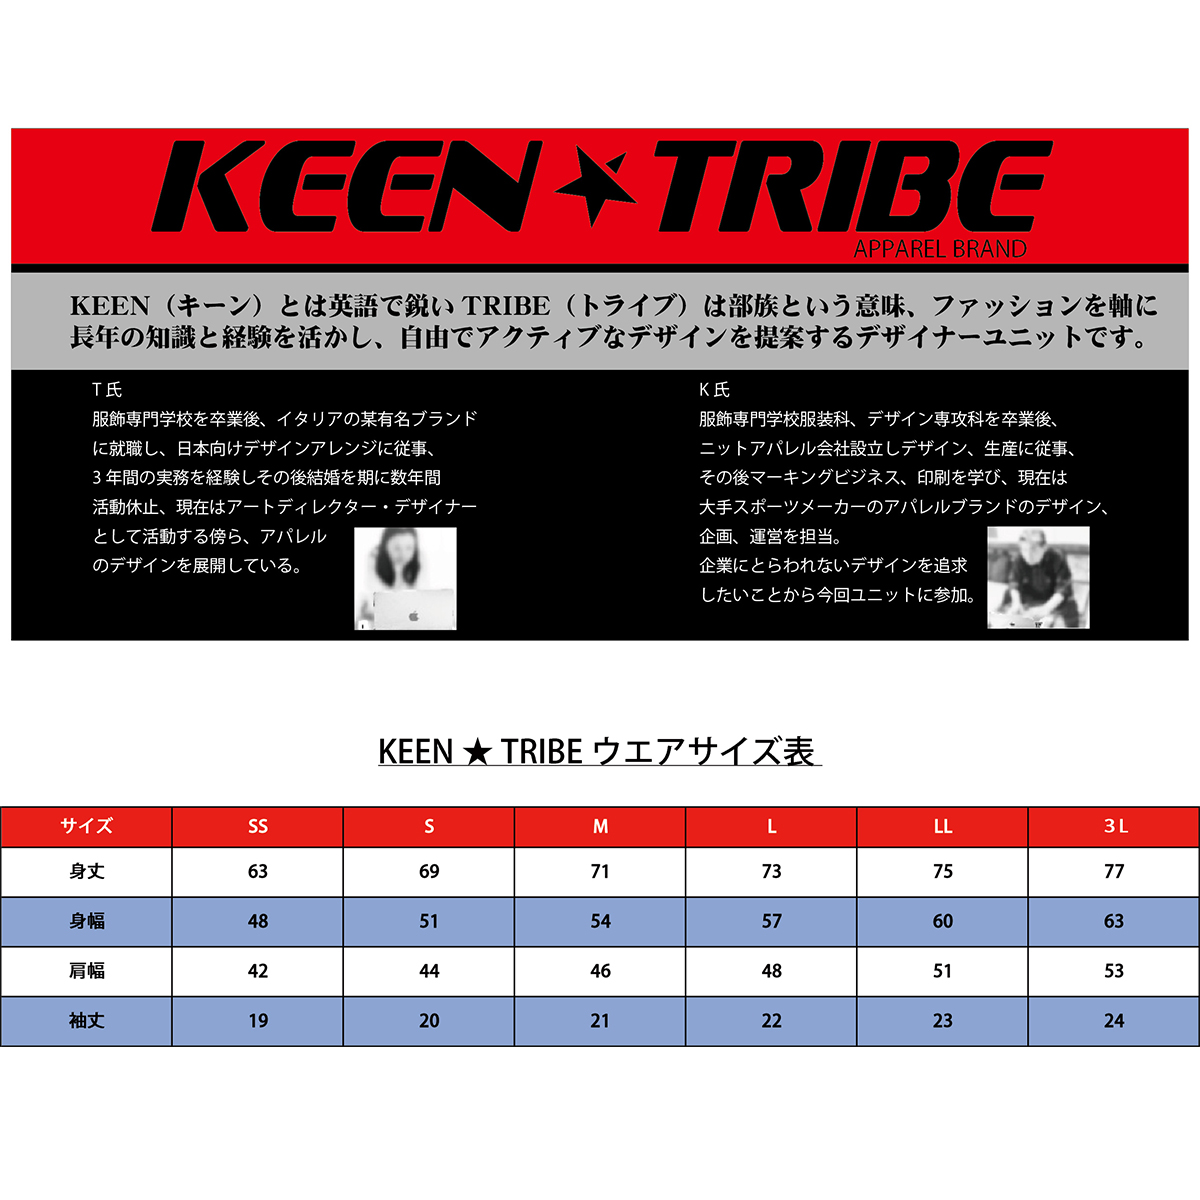 KEEN ★ TRIBE　KT-40(受注生産)